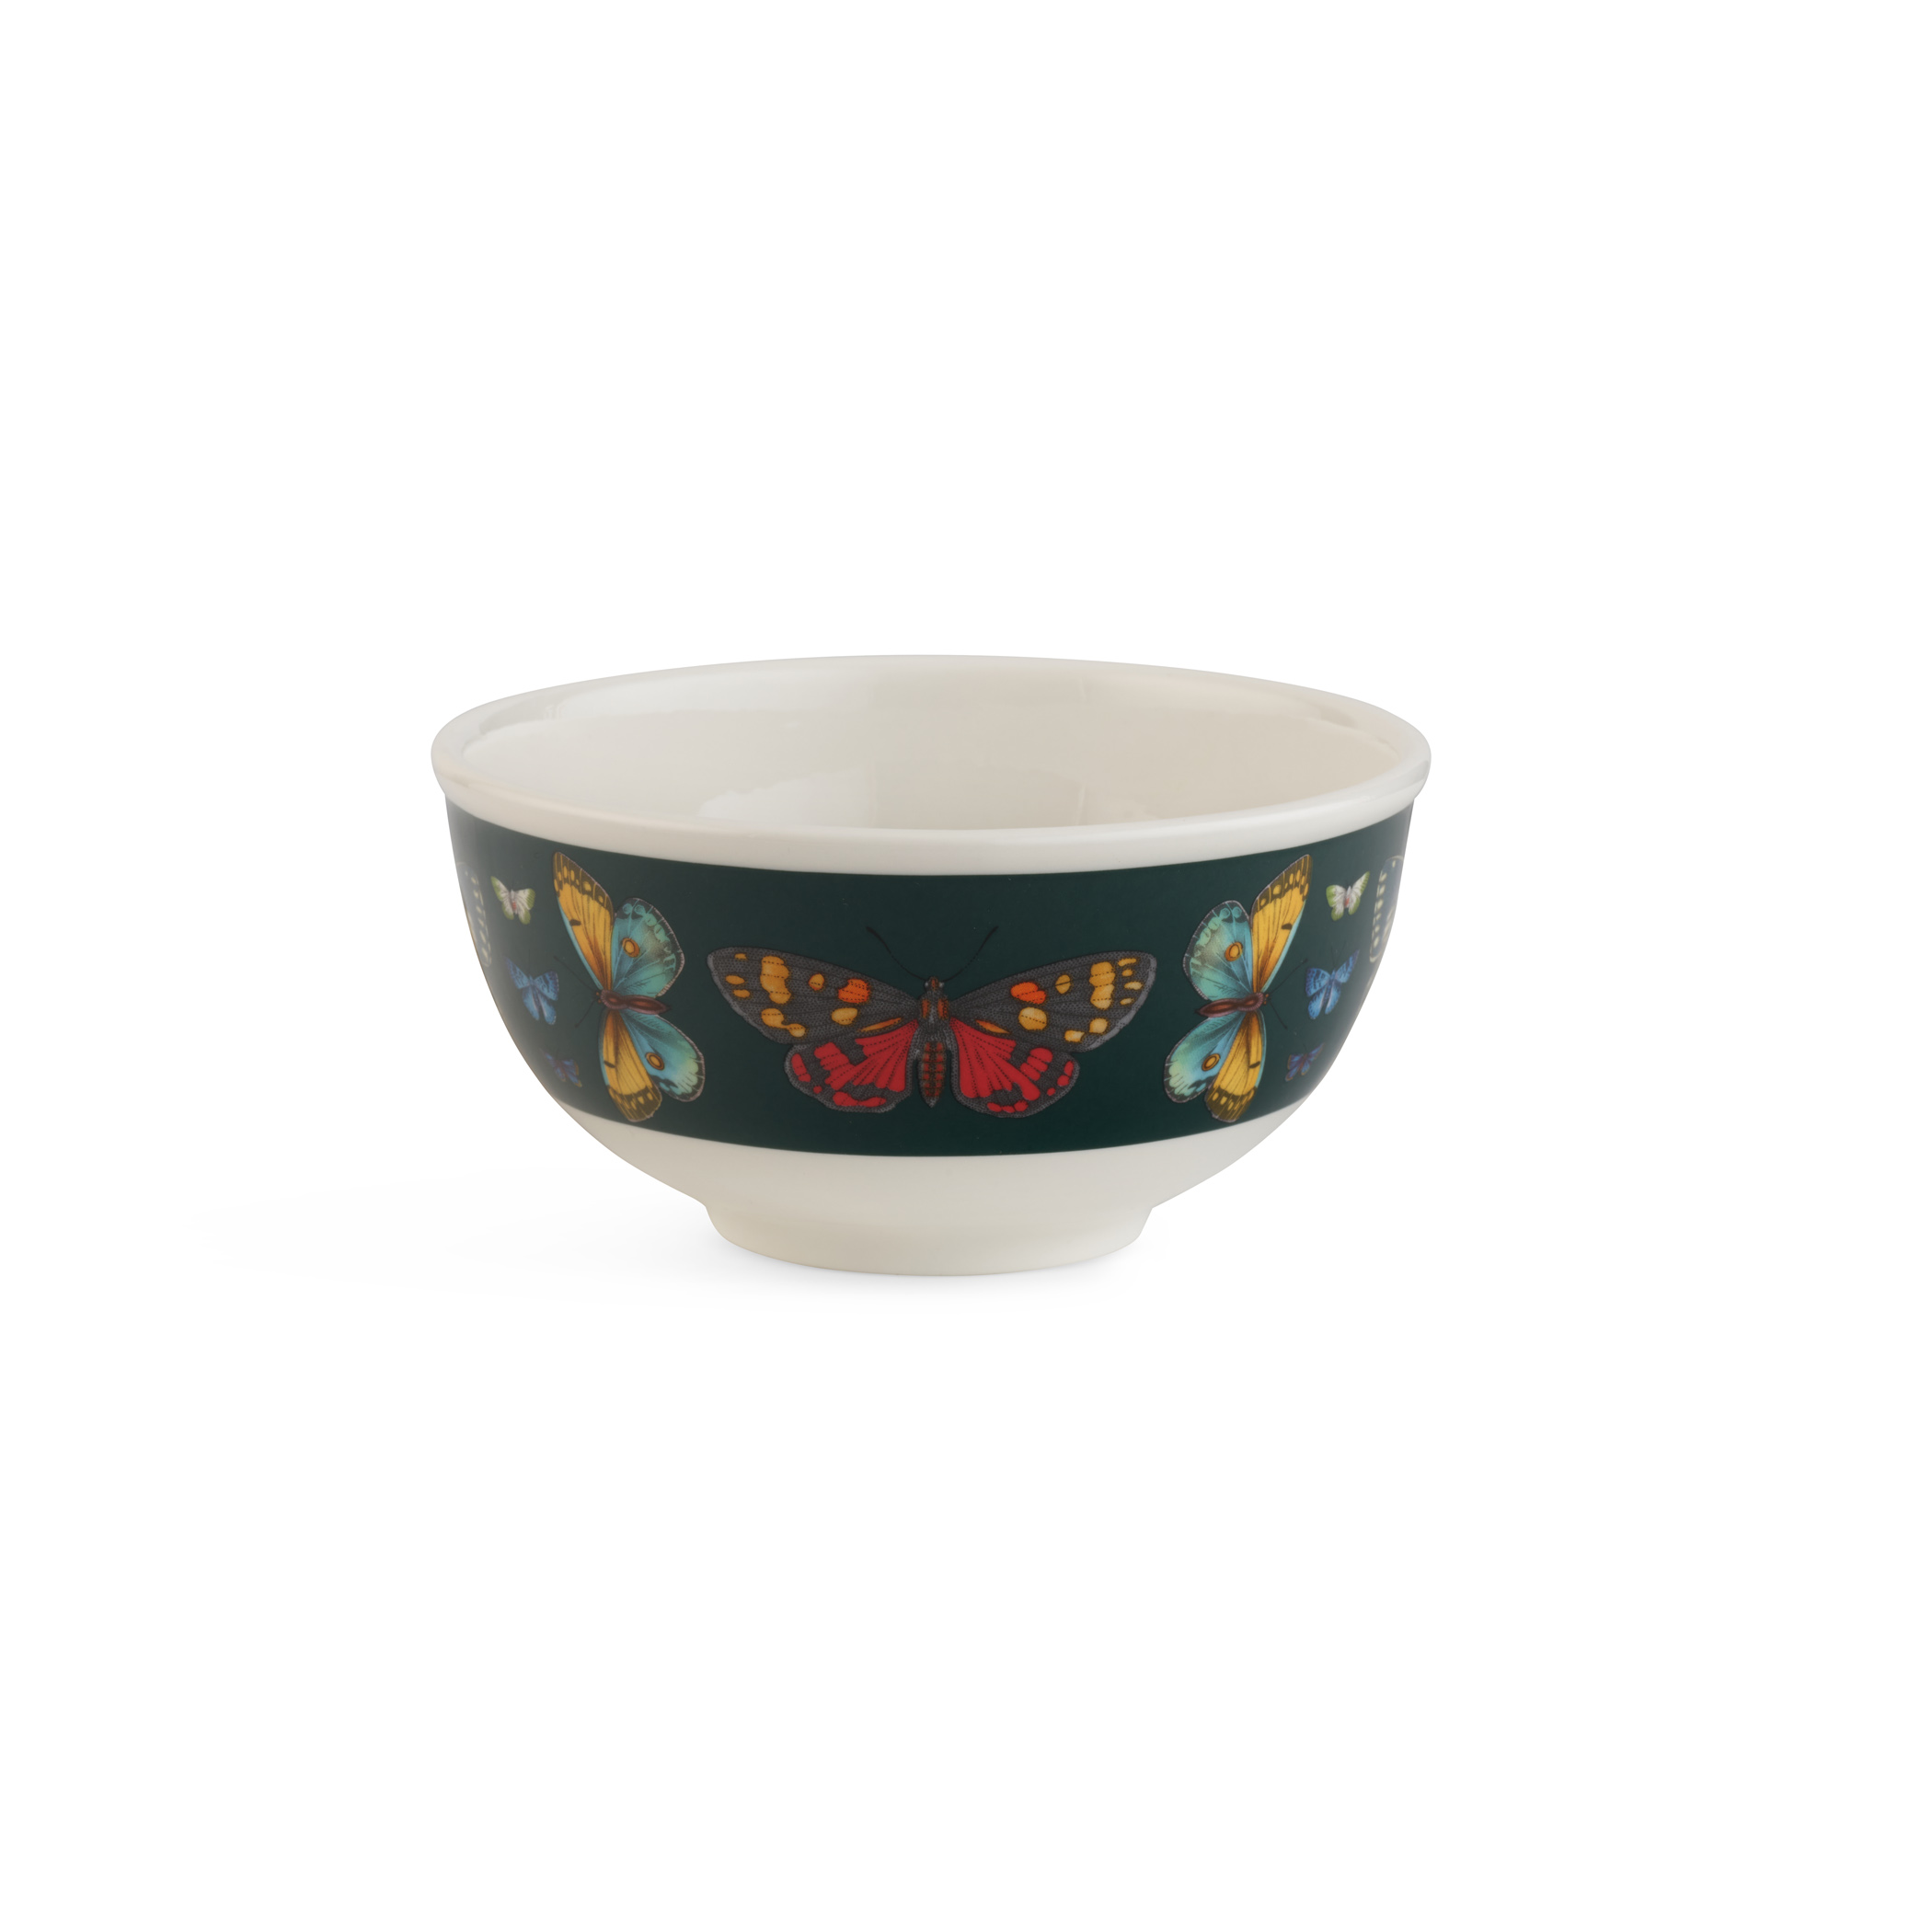 Botanic Garden Harmony Accents Green 6 Inch Bowl image number null